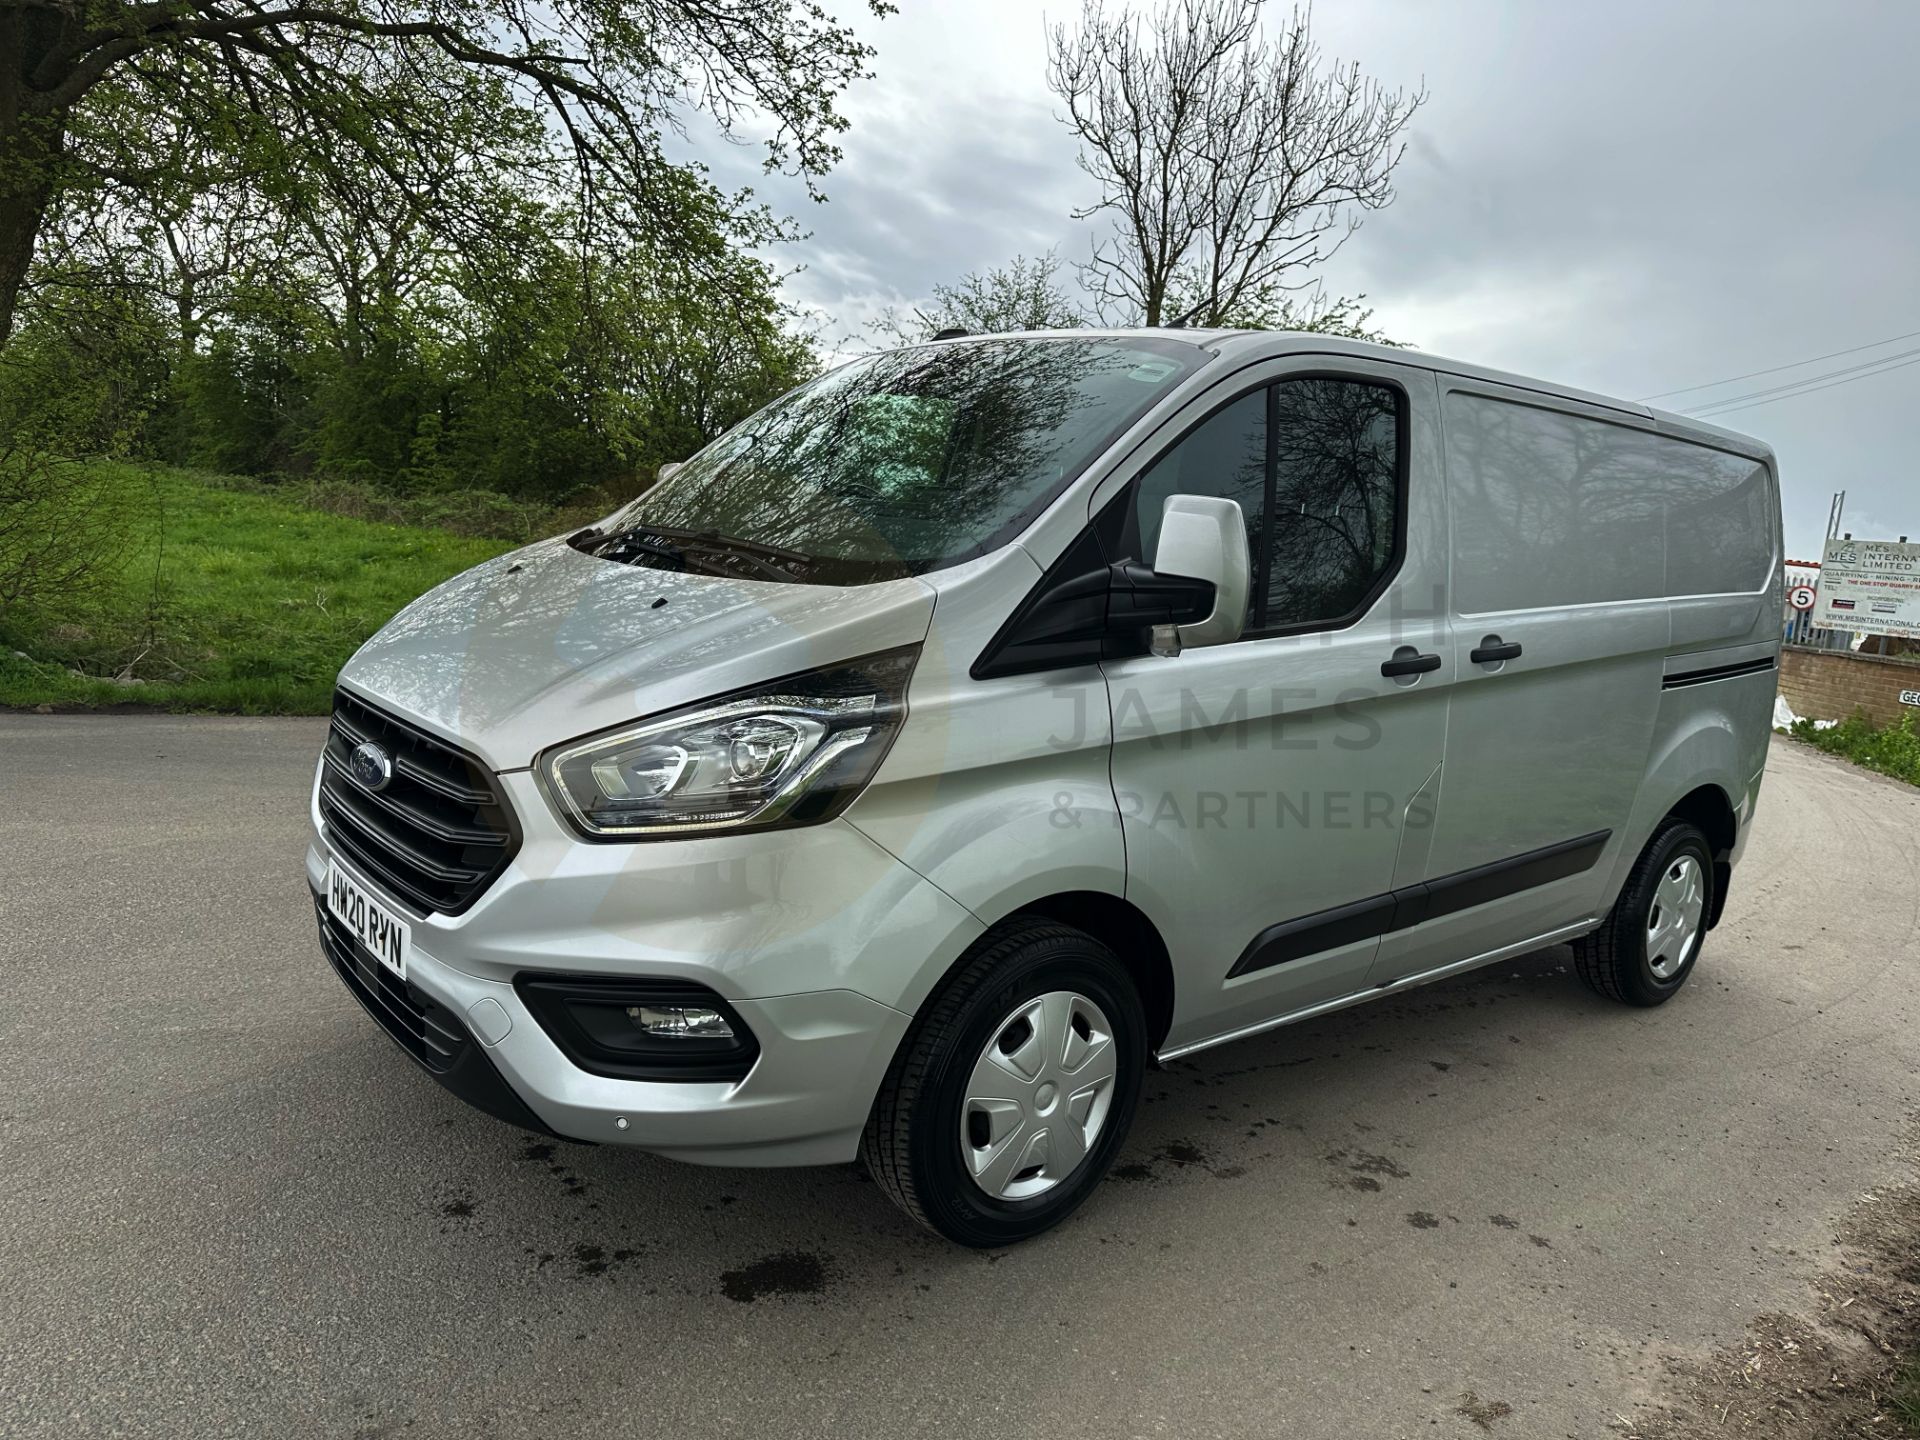 FORD TRANSIT CUSTOM "TREND" 2.0TDCI (130) 20 REG -1 OWNER- SILVER -GREAT SPEC -LOW MILEAGE - Image 6 of 38